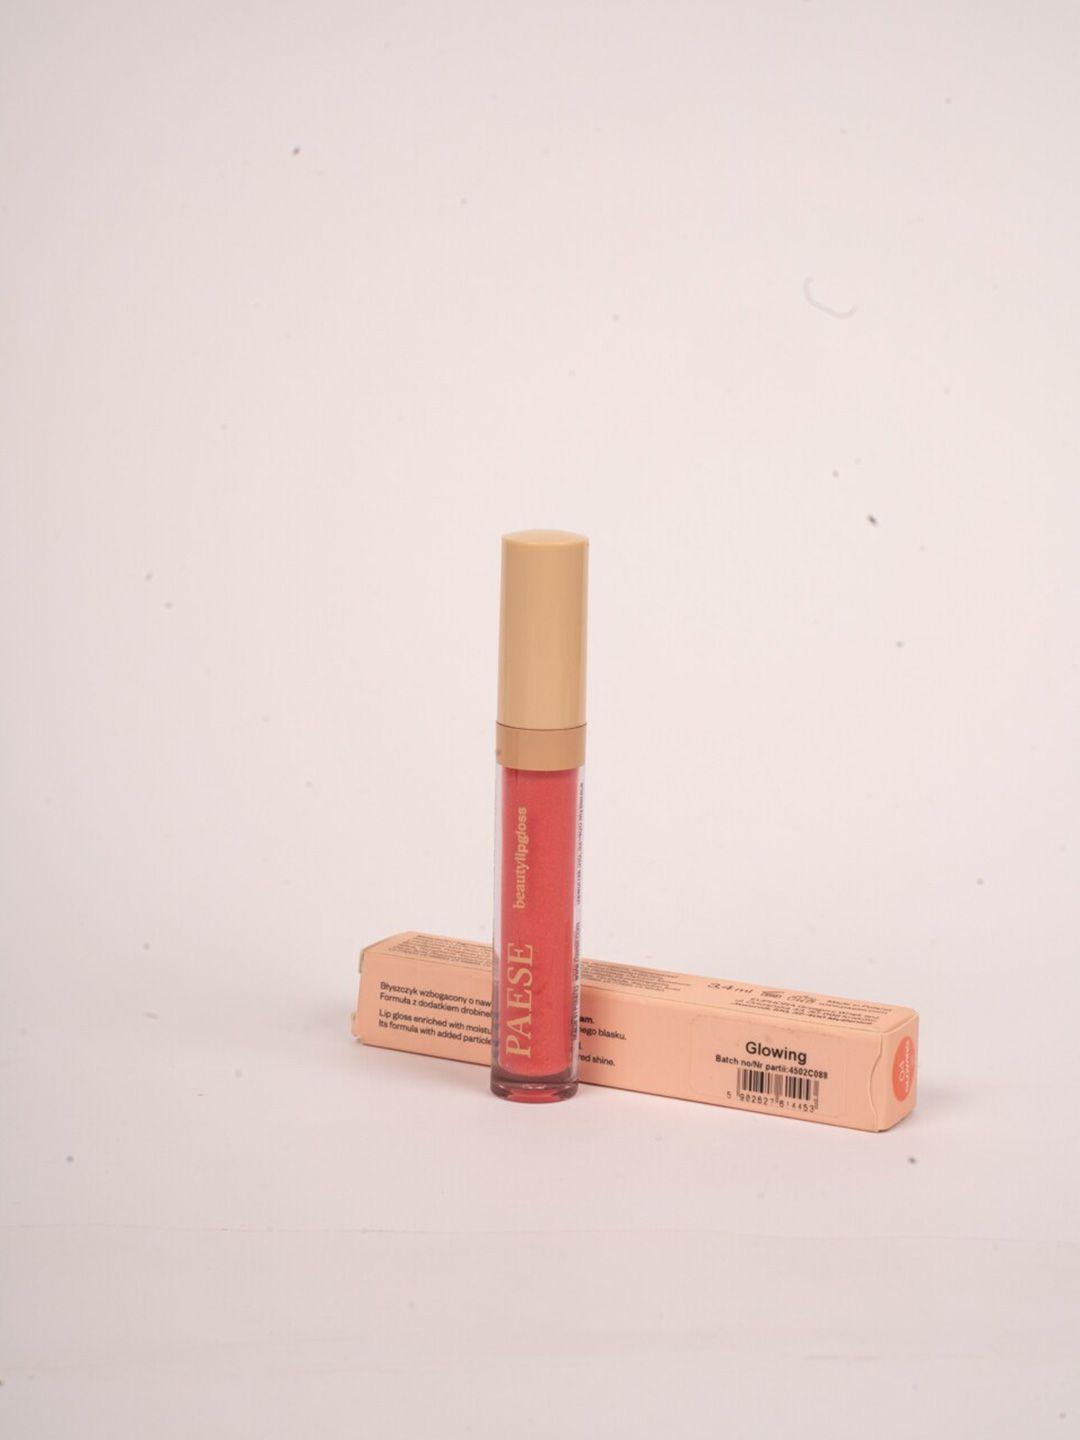 paese cosmetics beauty lip gloss 3.4 ml - sultry 2